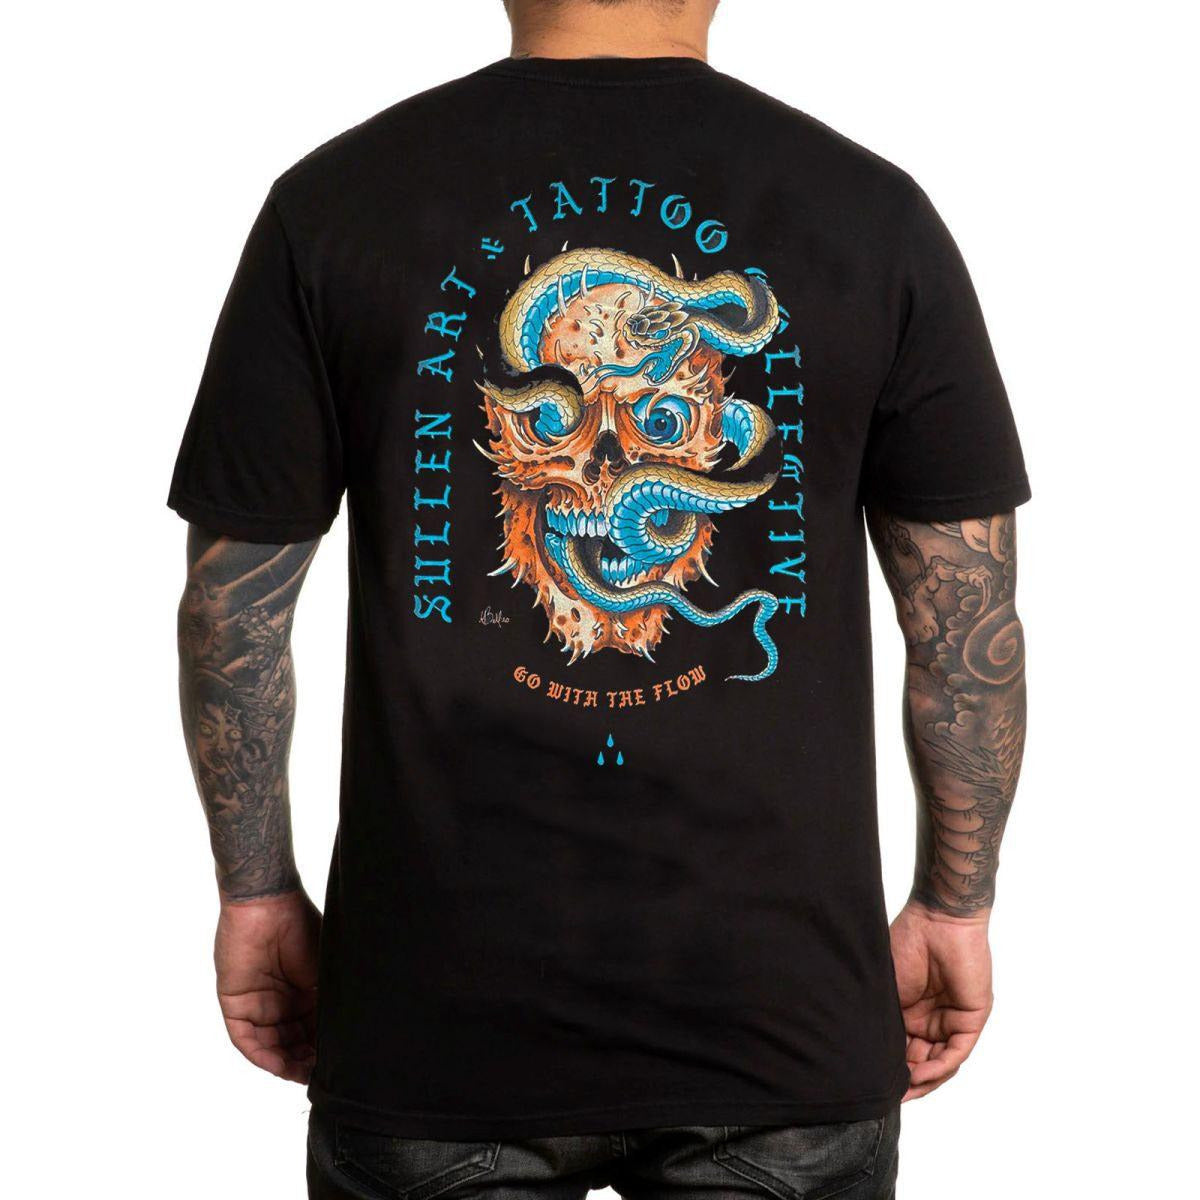 SULLEN-ART-COLLECTIVE-FLOW-SS-TEE - T-SHIRT - Synik Clothing - synikclothing.com